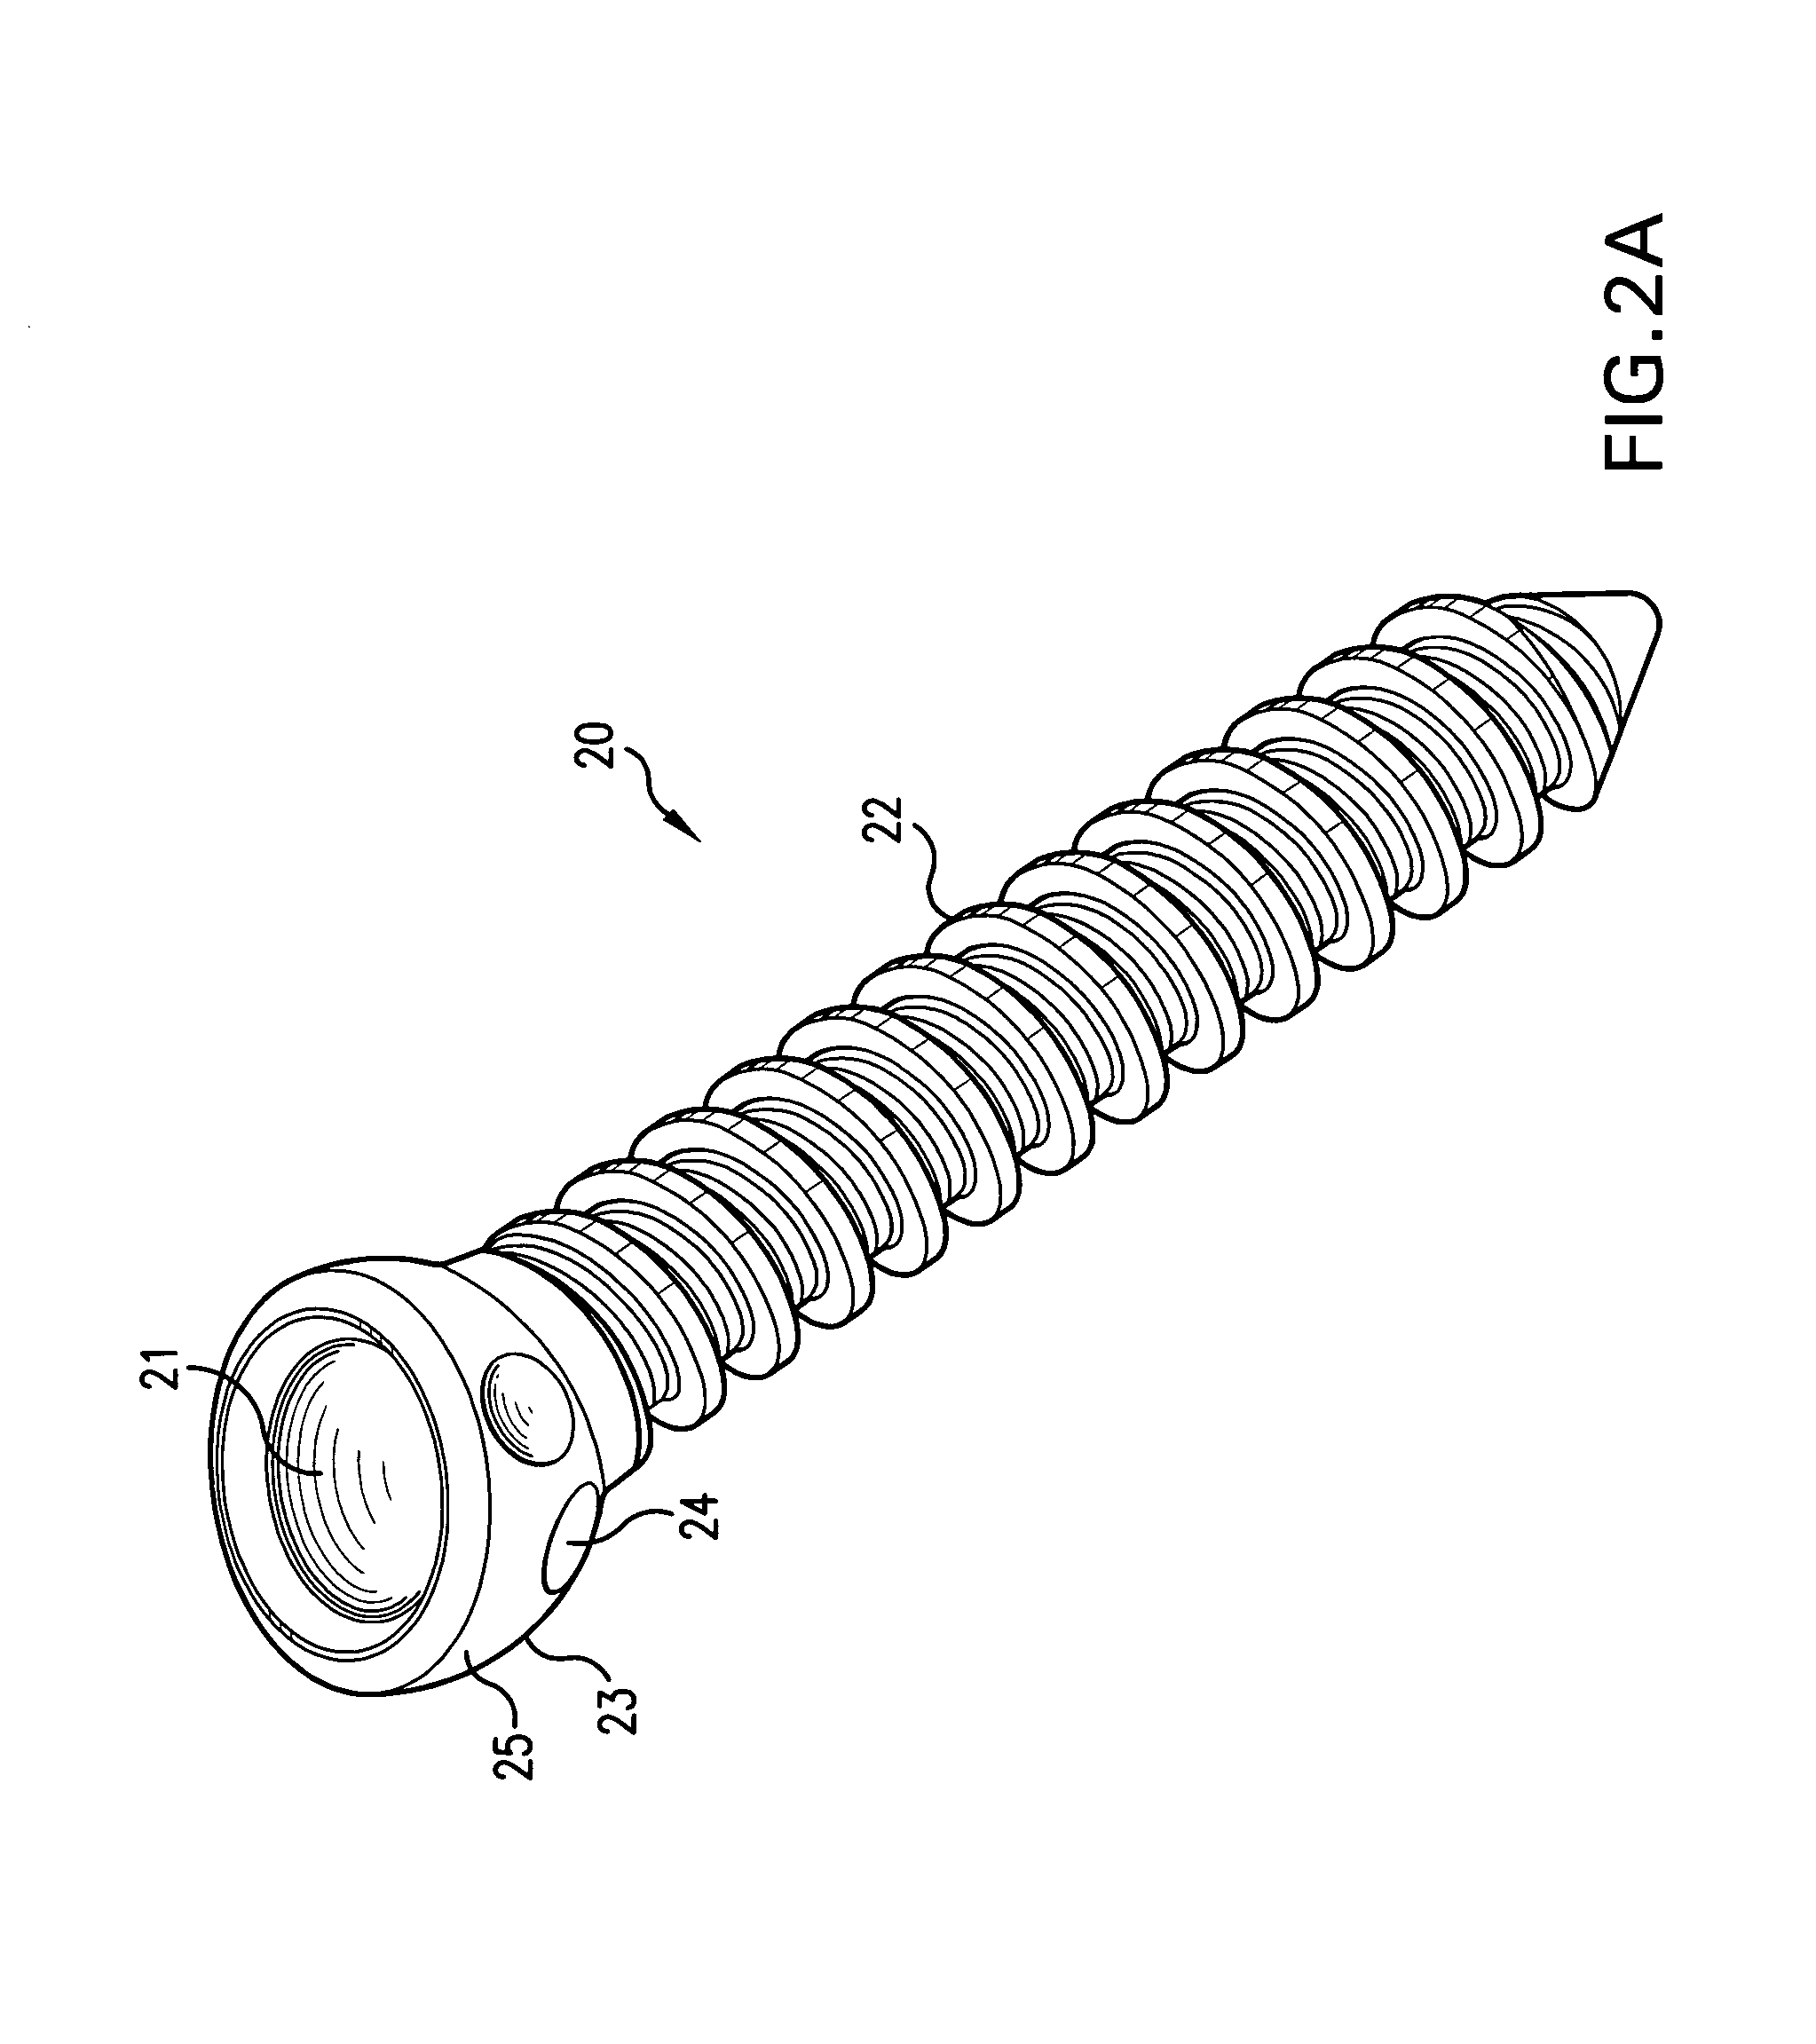 Biased angle polyaxial pedicle screw assembly